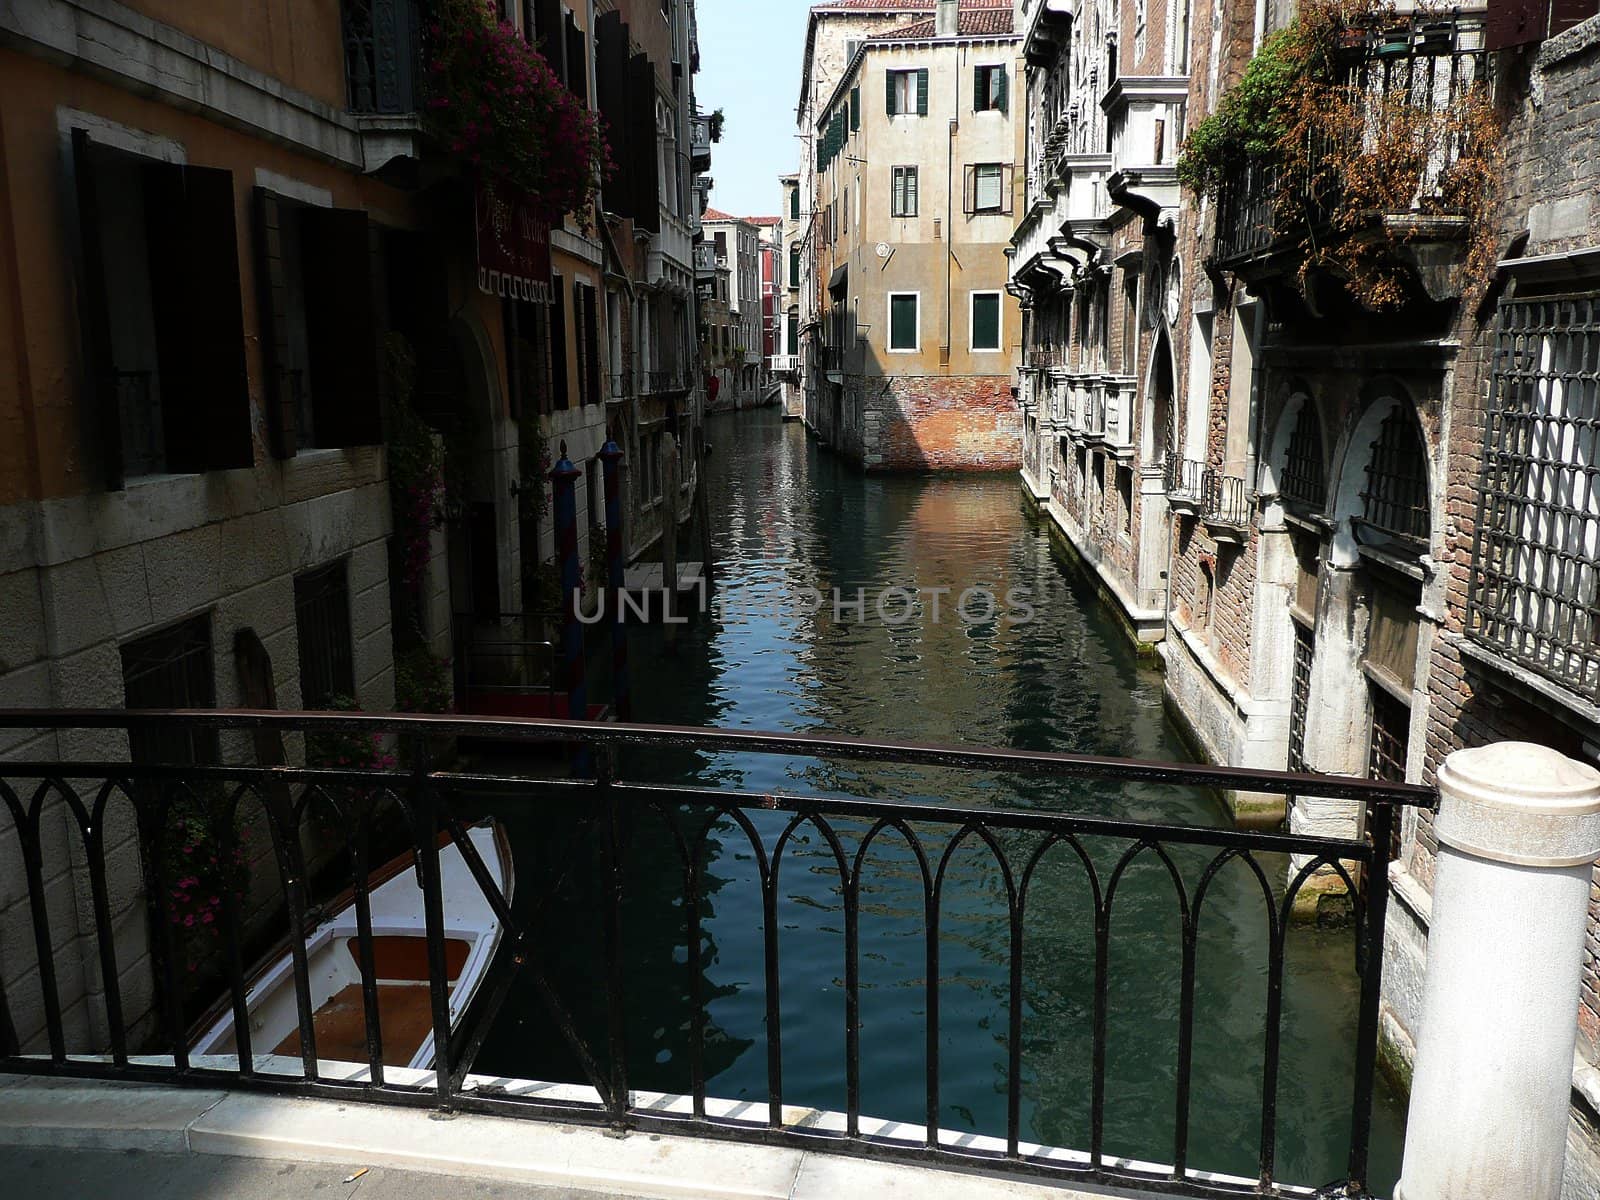 Deserted Canal, Venice, Italy